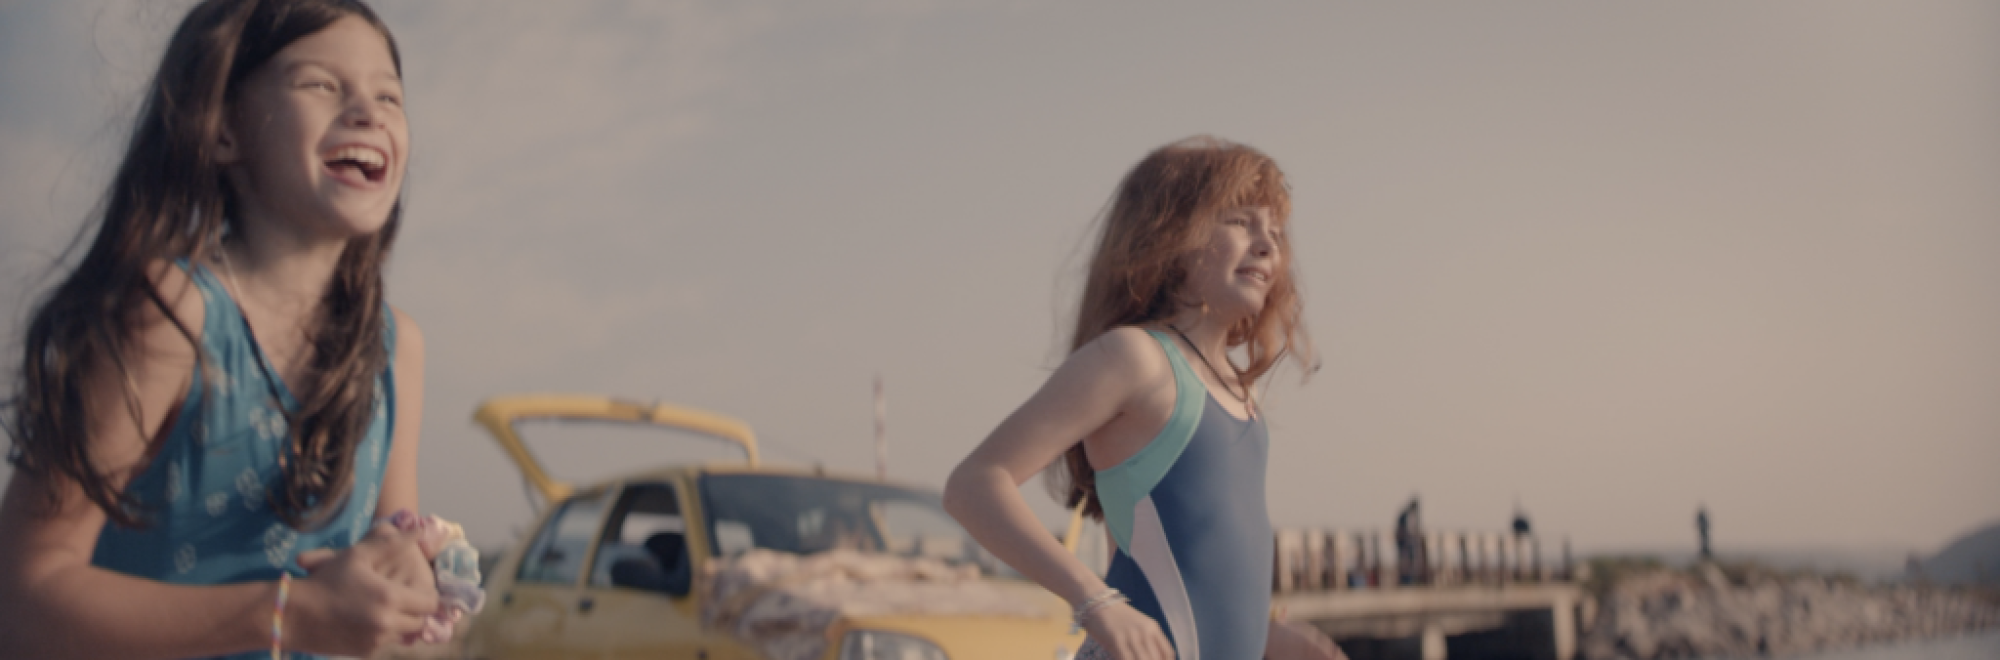 Renault celebrates 30 years of its Clio model with a truly epic ad